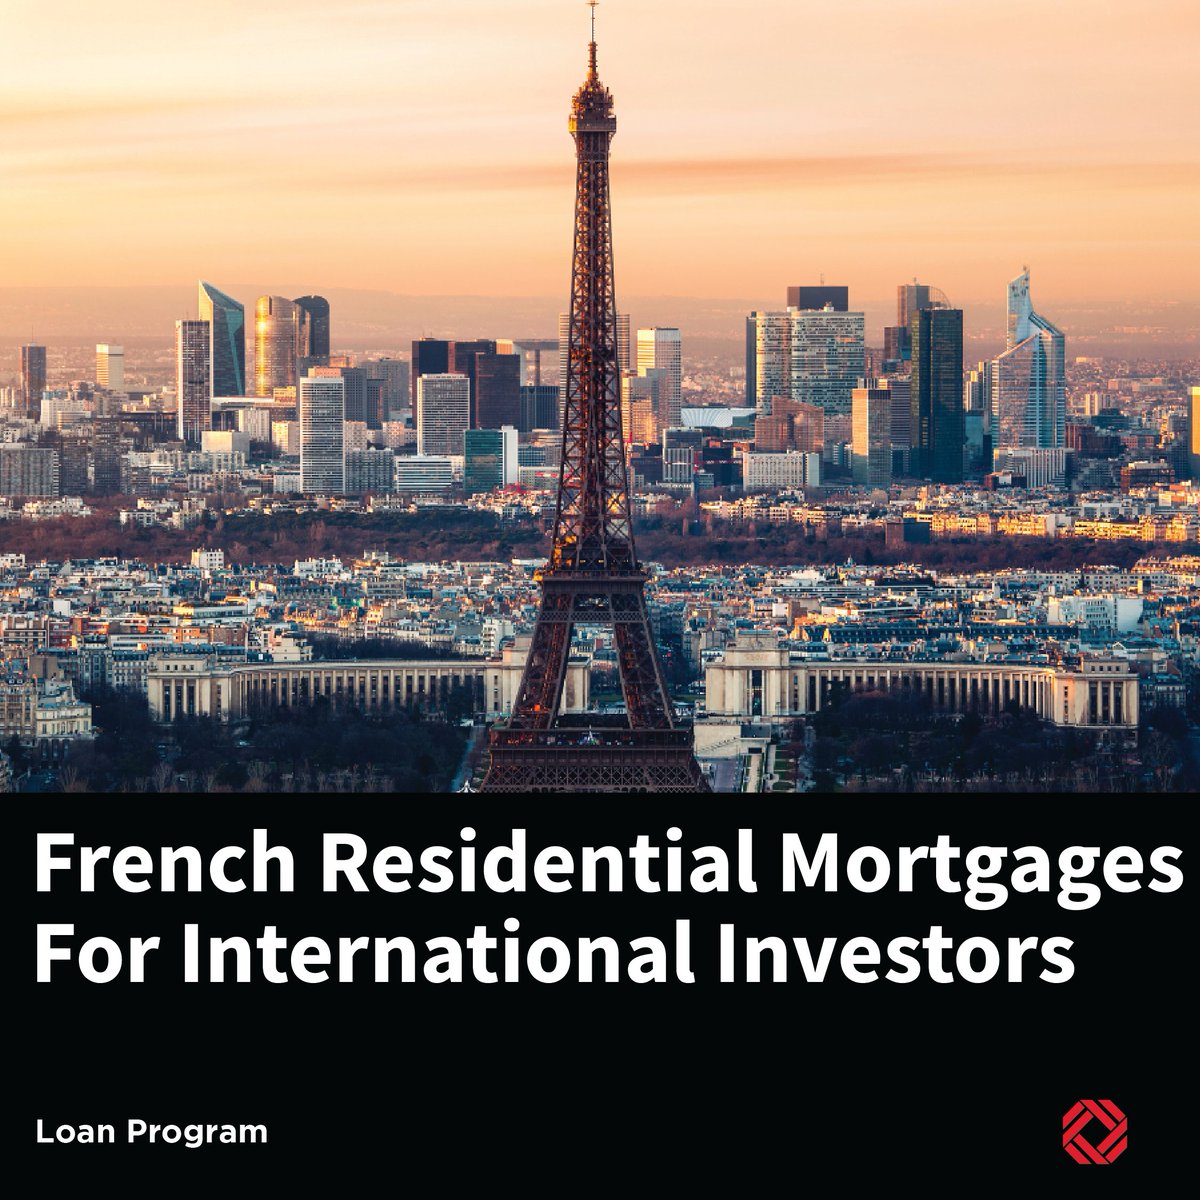 French Residential Mortgages for International Investors

Contact us at hello@gmg.asia to learn more about our French residential mortgages.

#frenchriveria #france #cotedazur #mediterranean #southoffrance #francerealestate #francepropertyinvesting #propertyinvestor #france